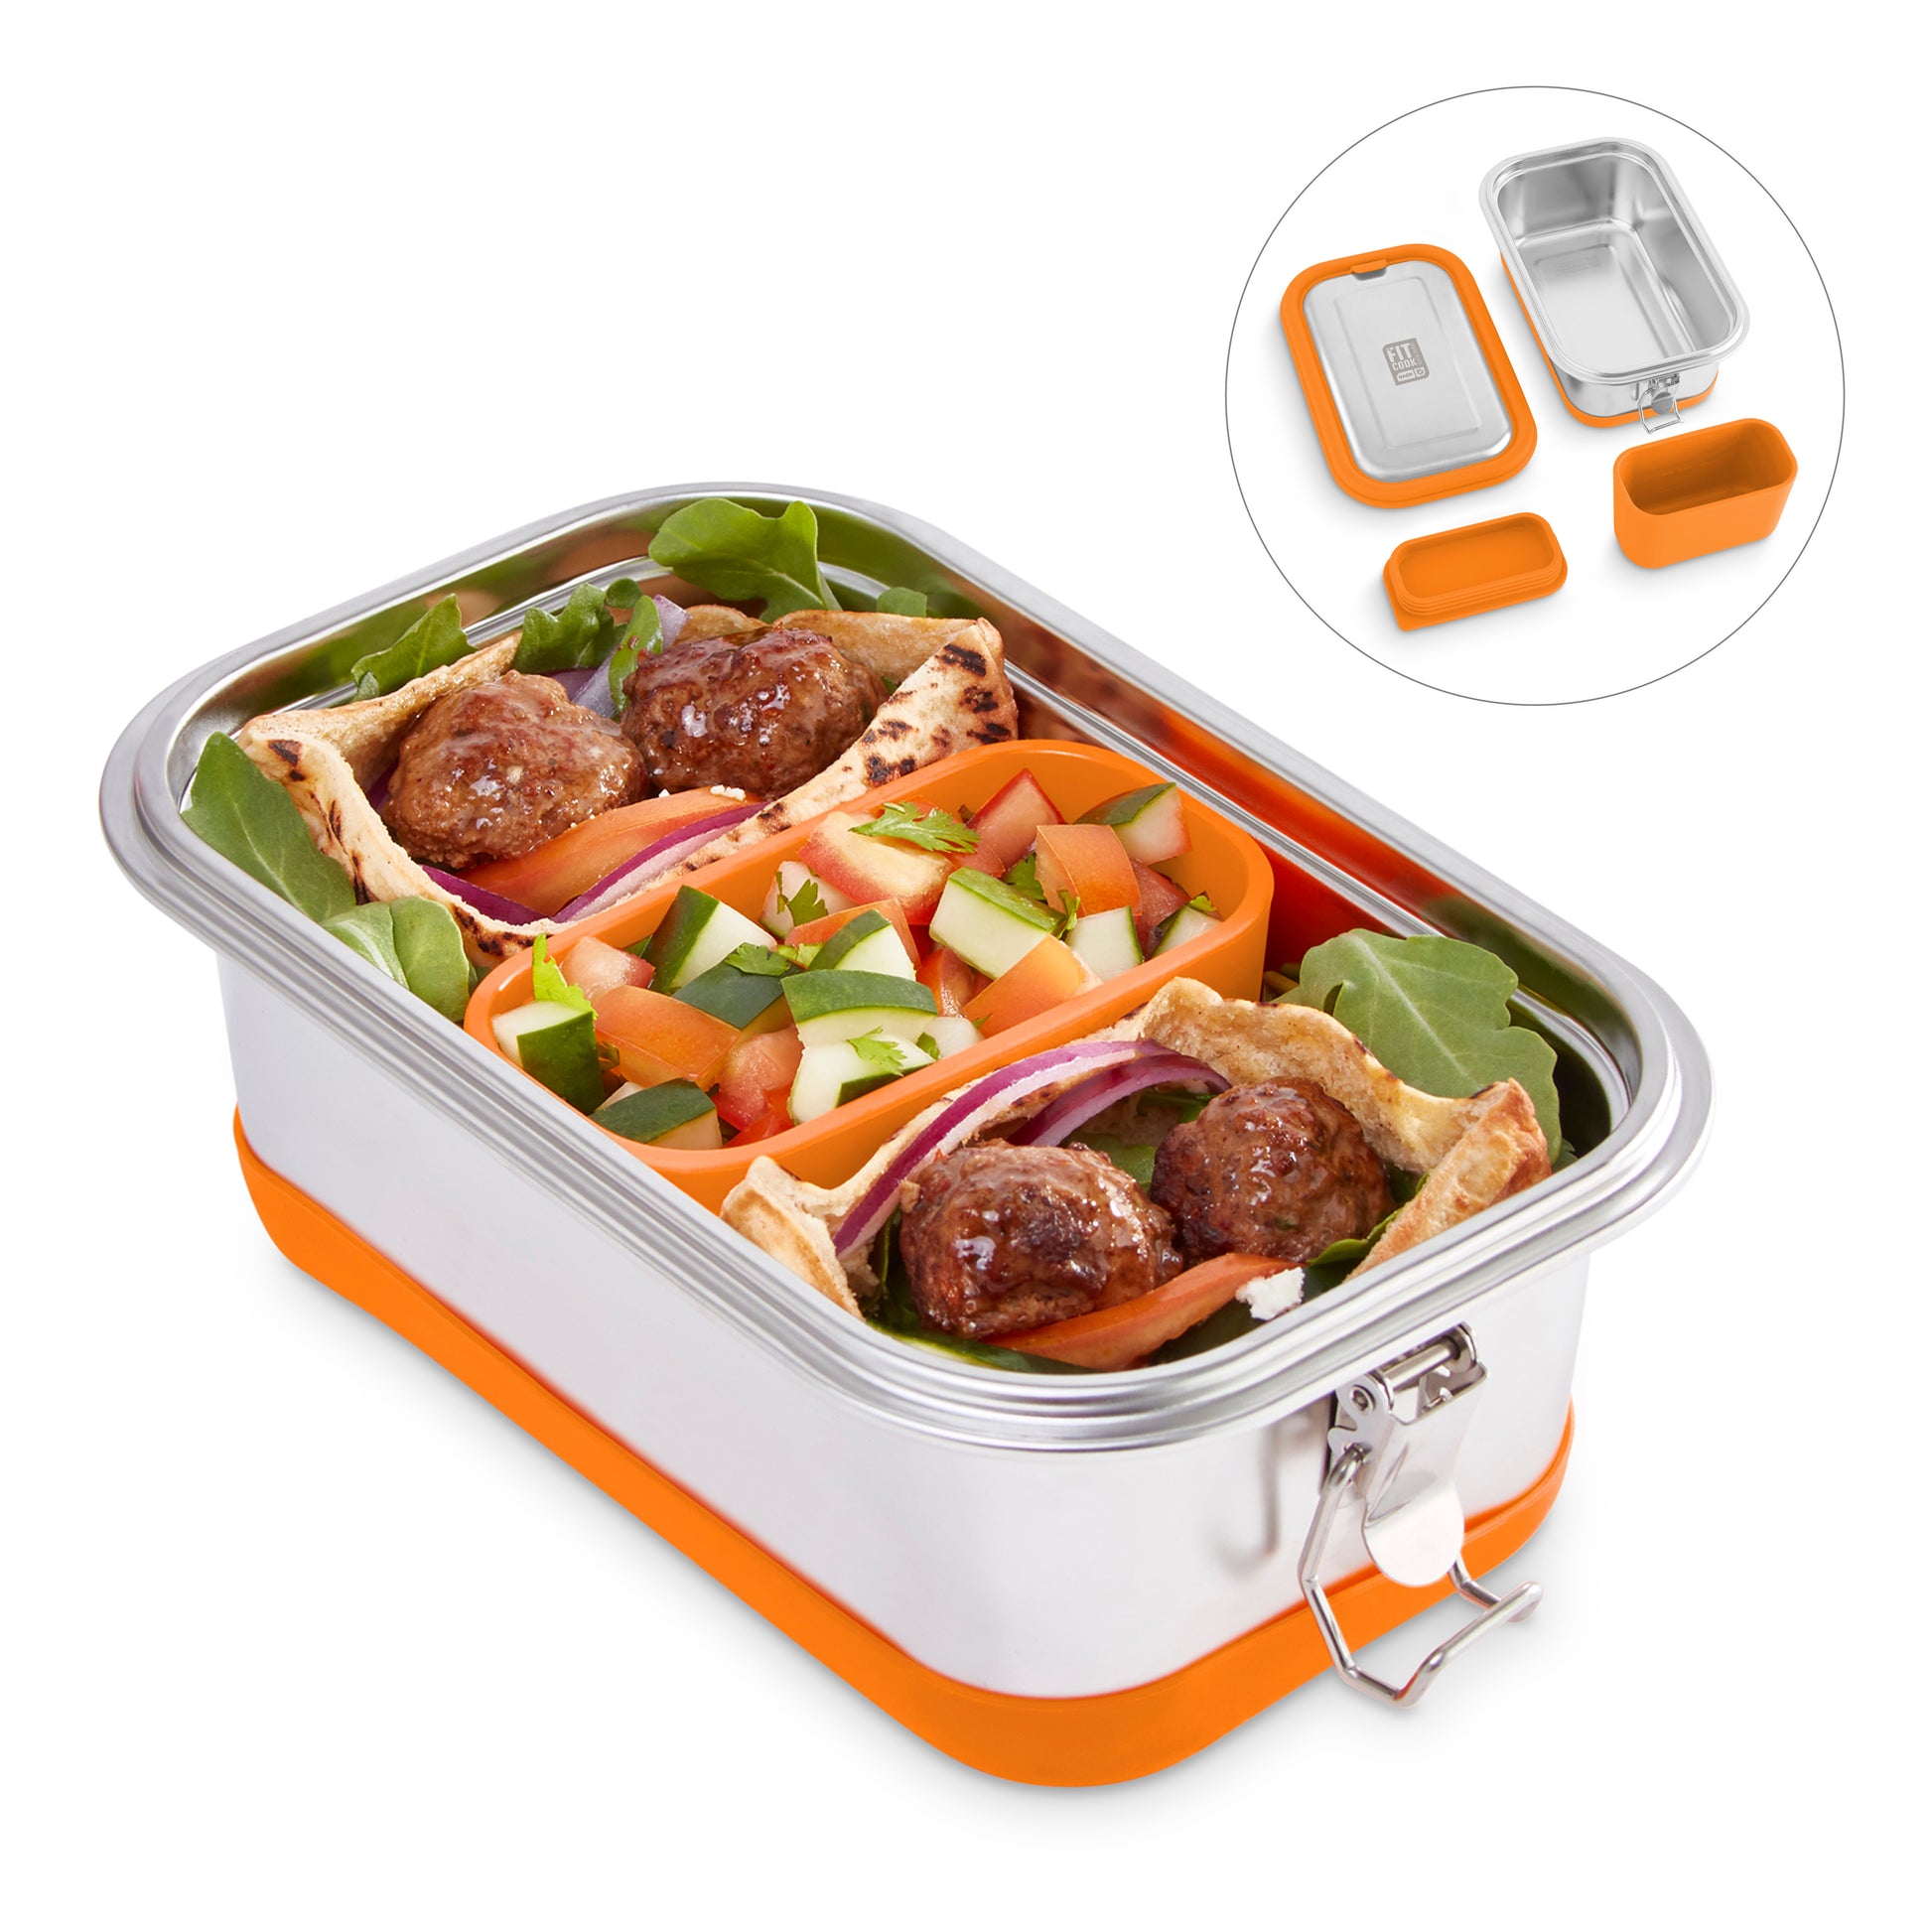 Stainless Steel Lunch Box Tools and Gadgets The Fit Cook x Dash Citrus  